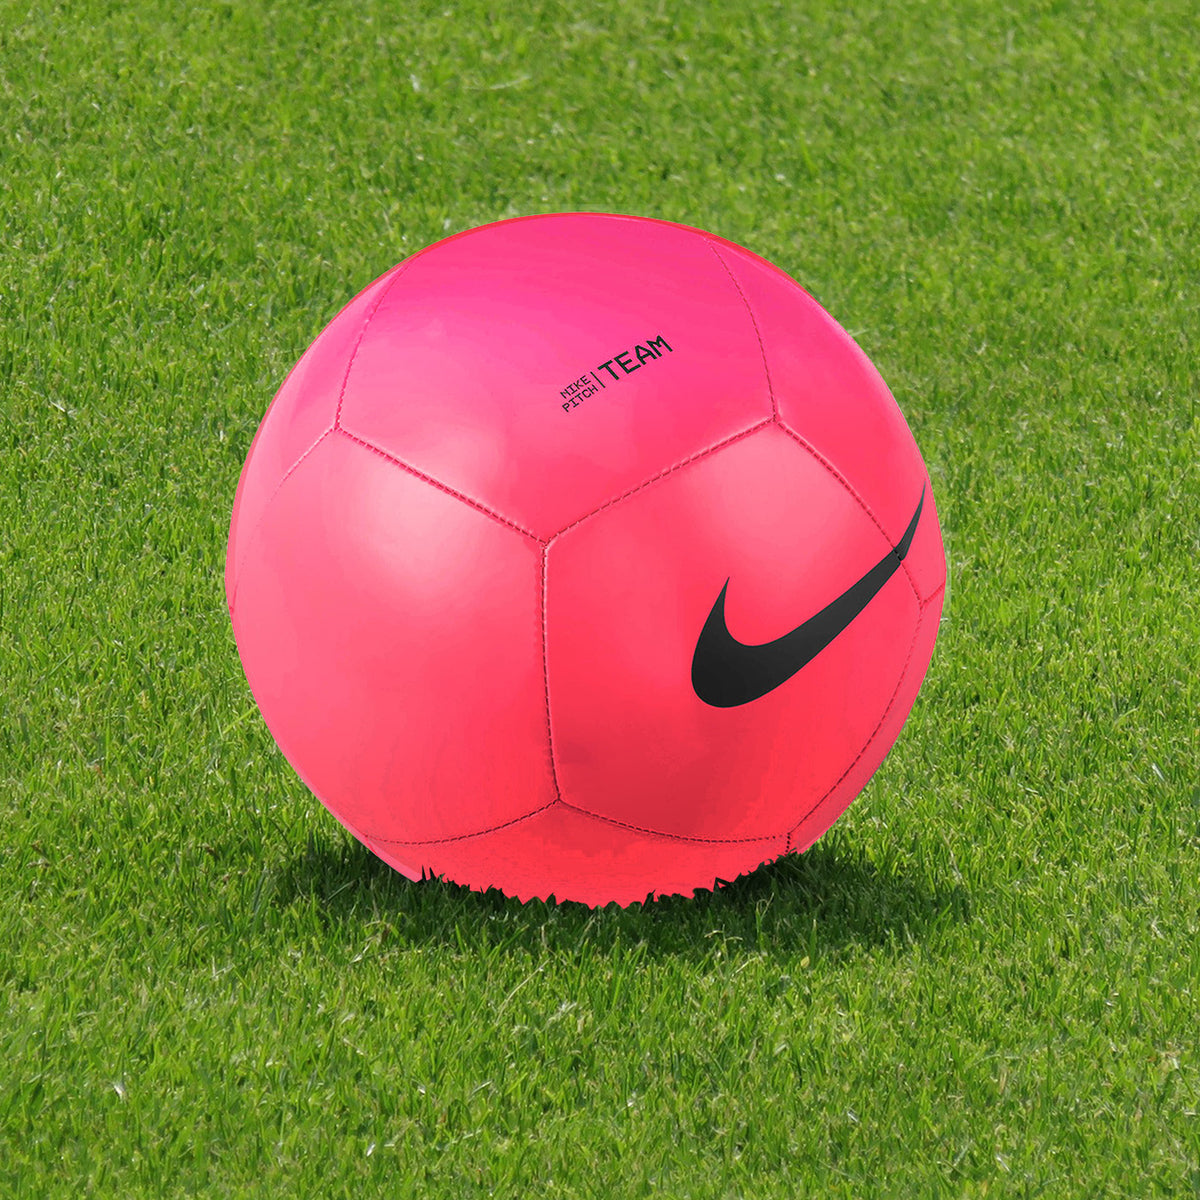 Nike Pitch Team Football - Bright Pink Finish - Ball Positioned on Turf on Modern Football Pitch